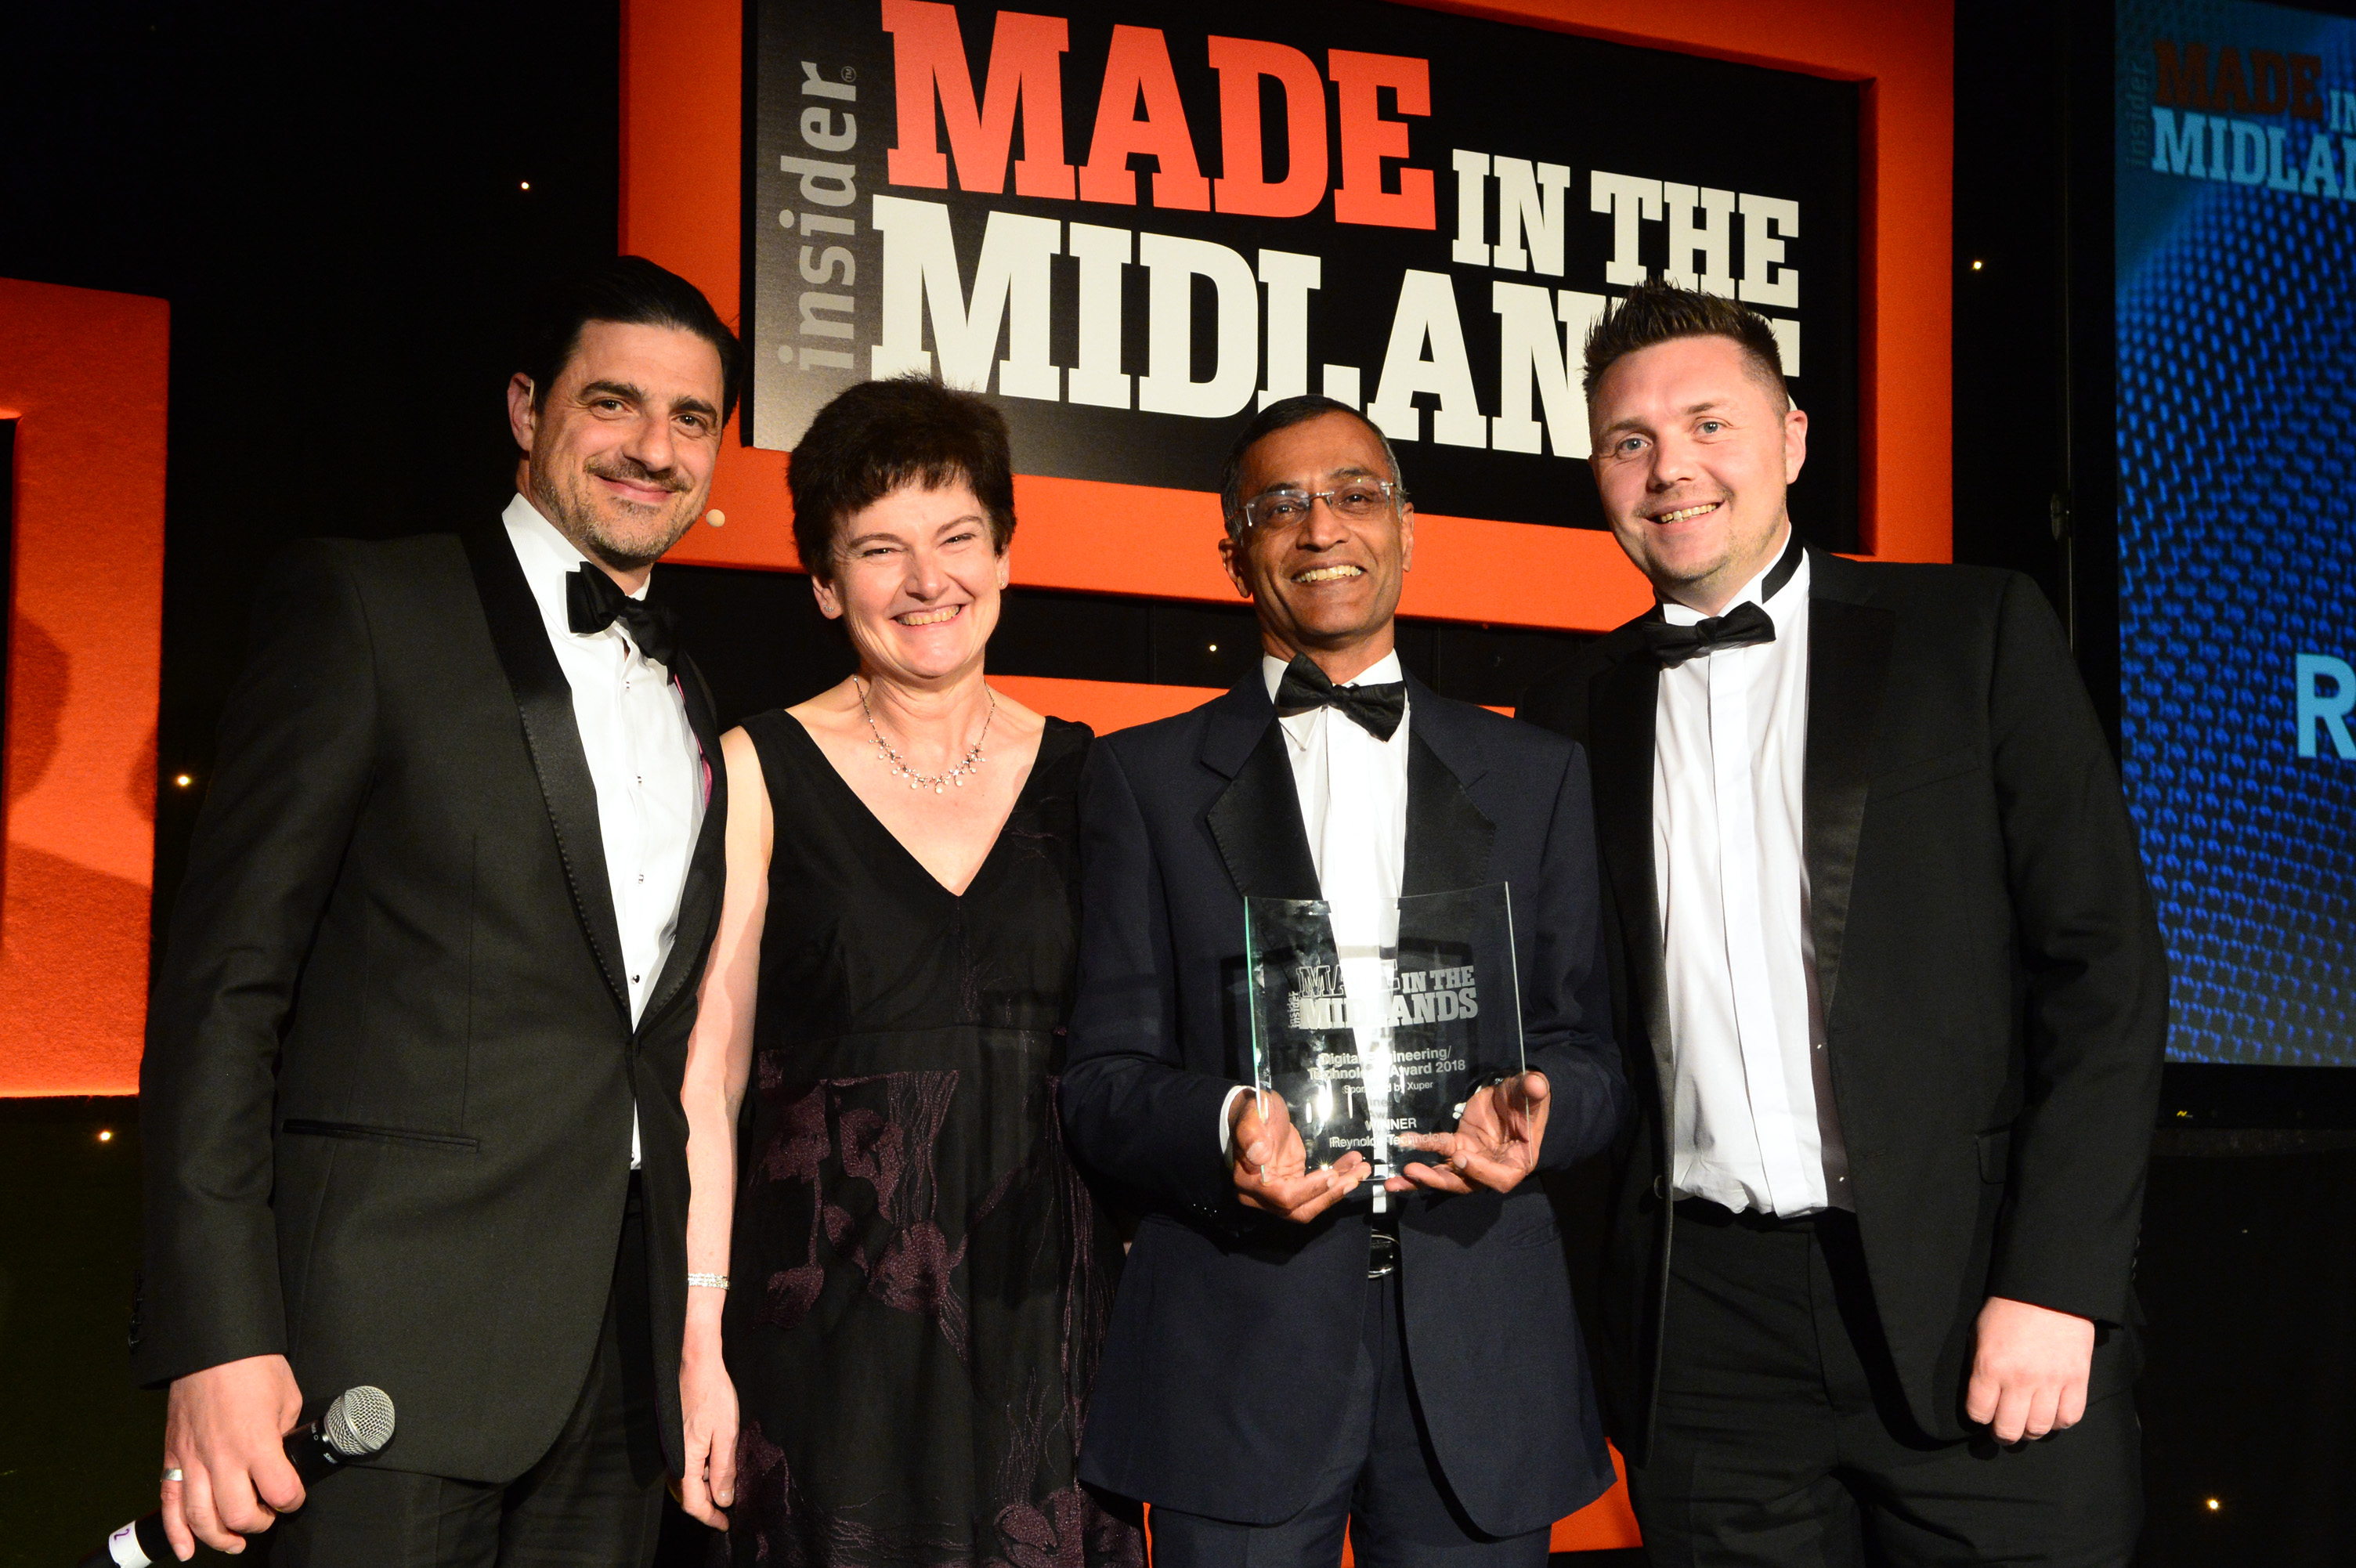 Reynolds Technology wins Made in the Midlands award